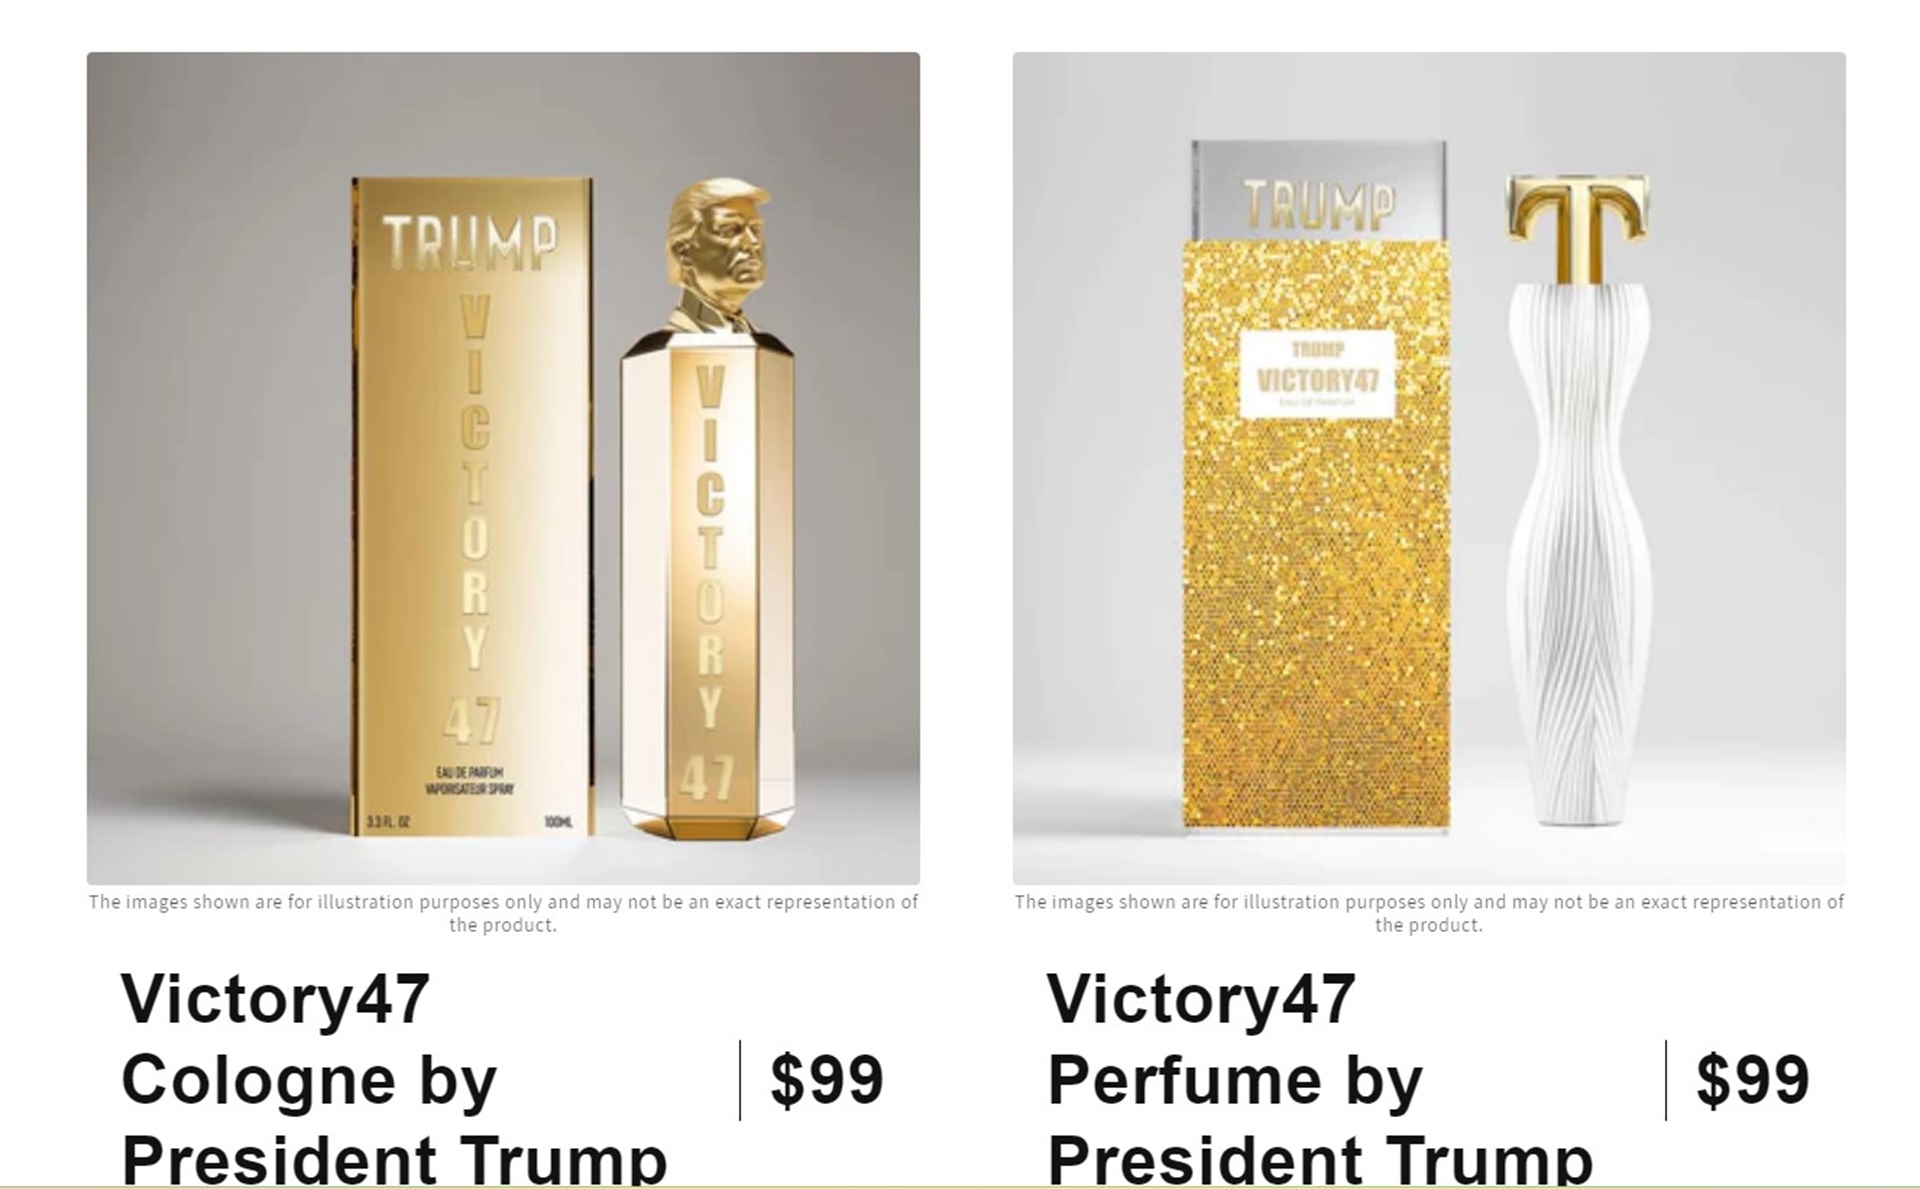 Who wouldn't want to smell like Trump?